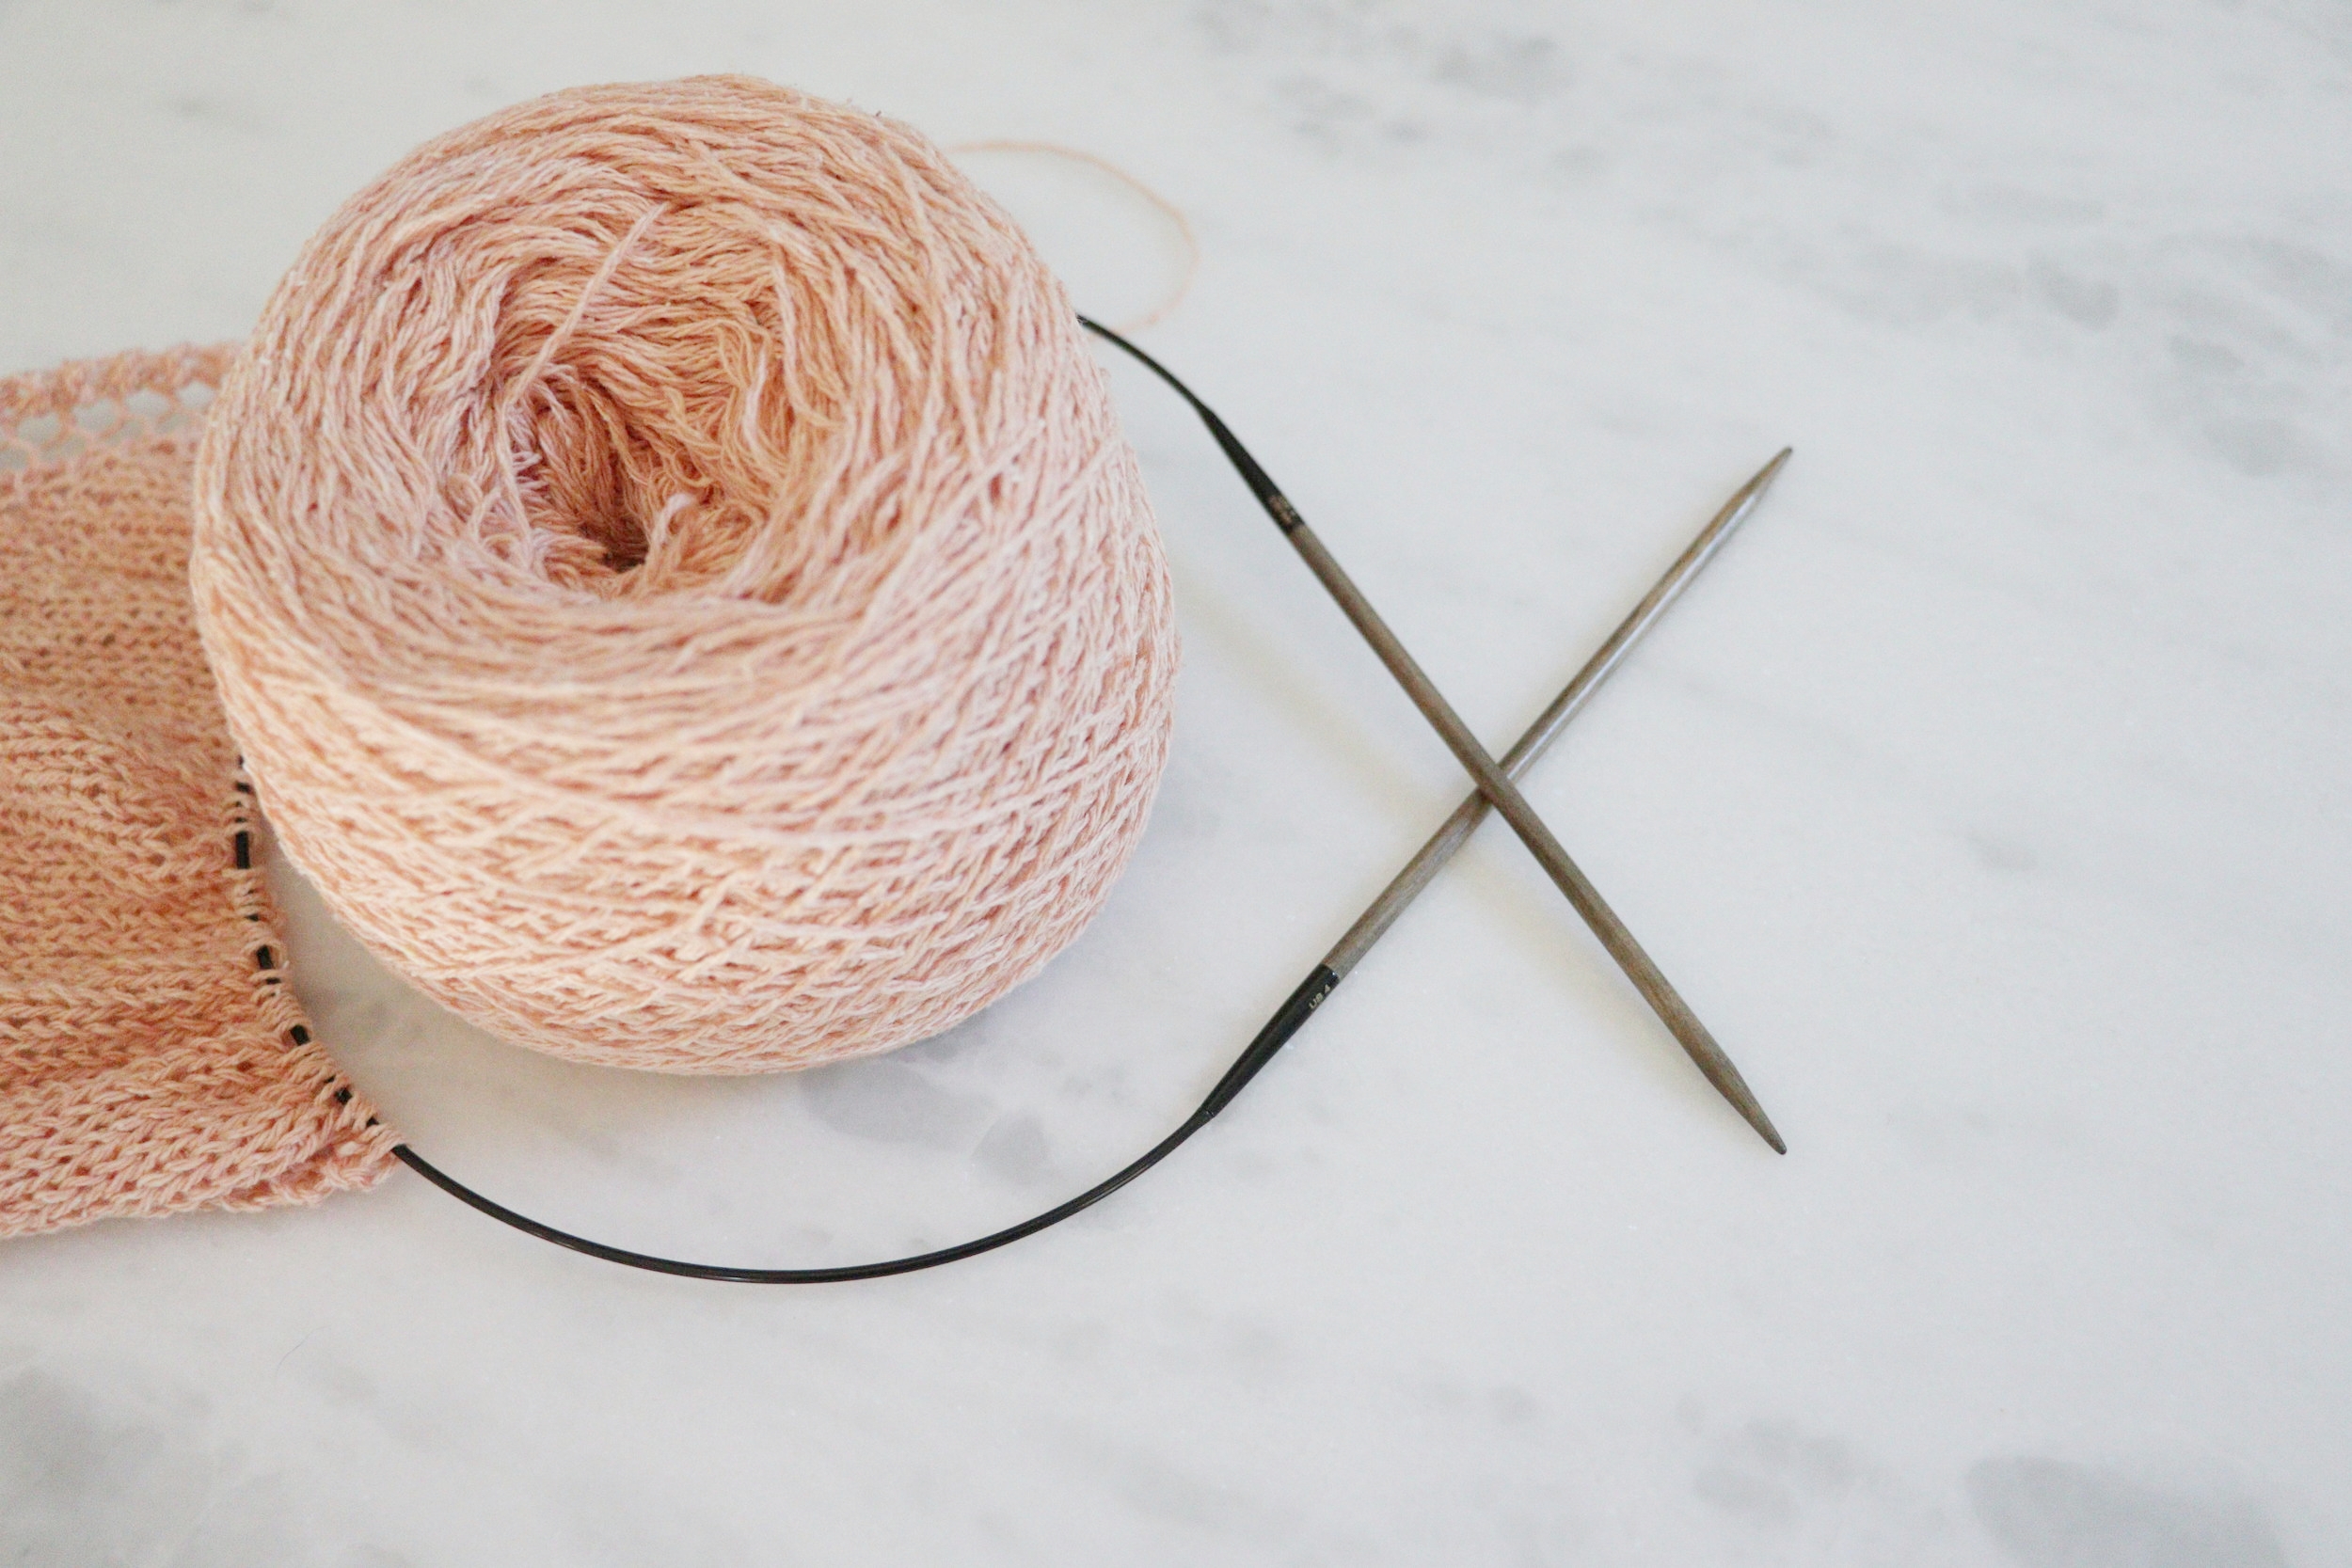 The Best Yarn Needle  Reviews, Ratings, Comparisons